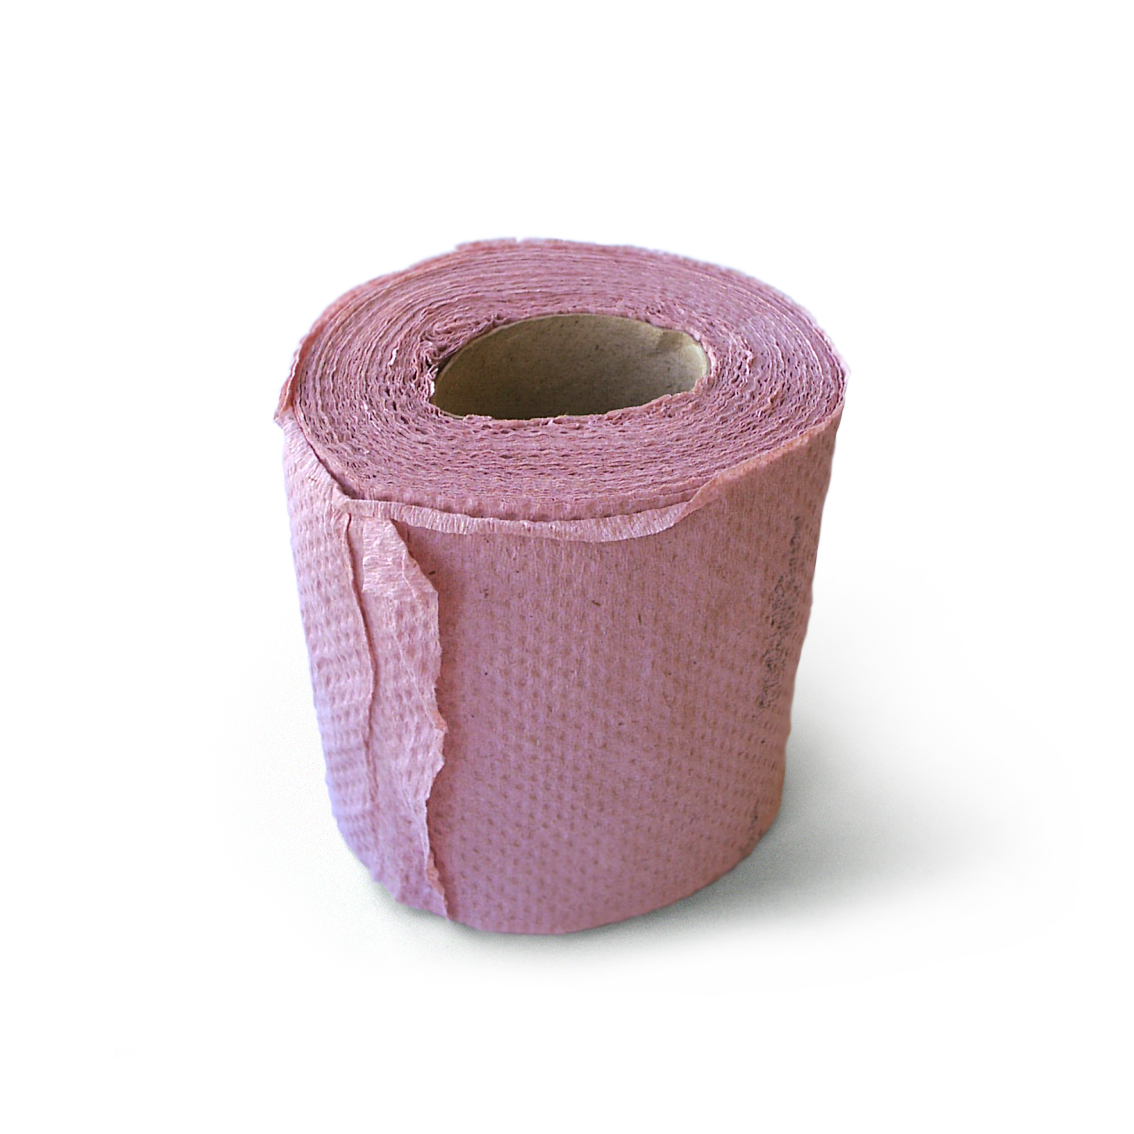 File:Pink Toilet Paper.jpg - Wikimedia Commons